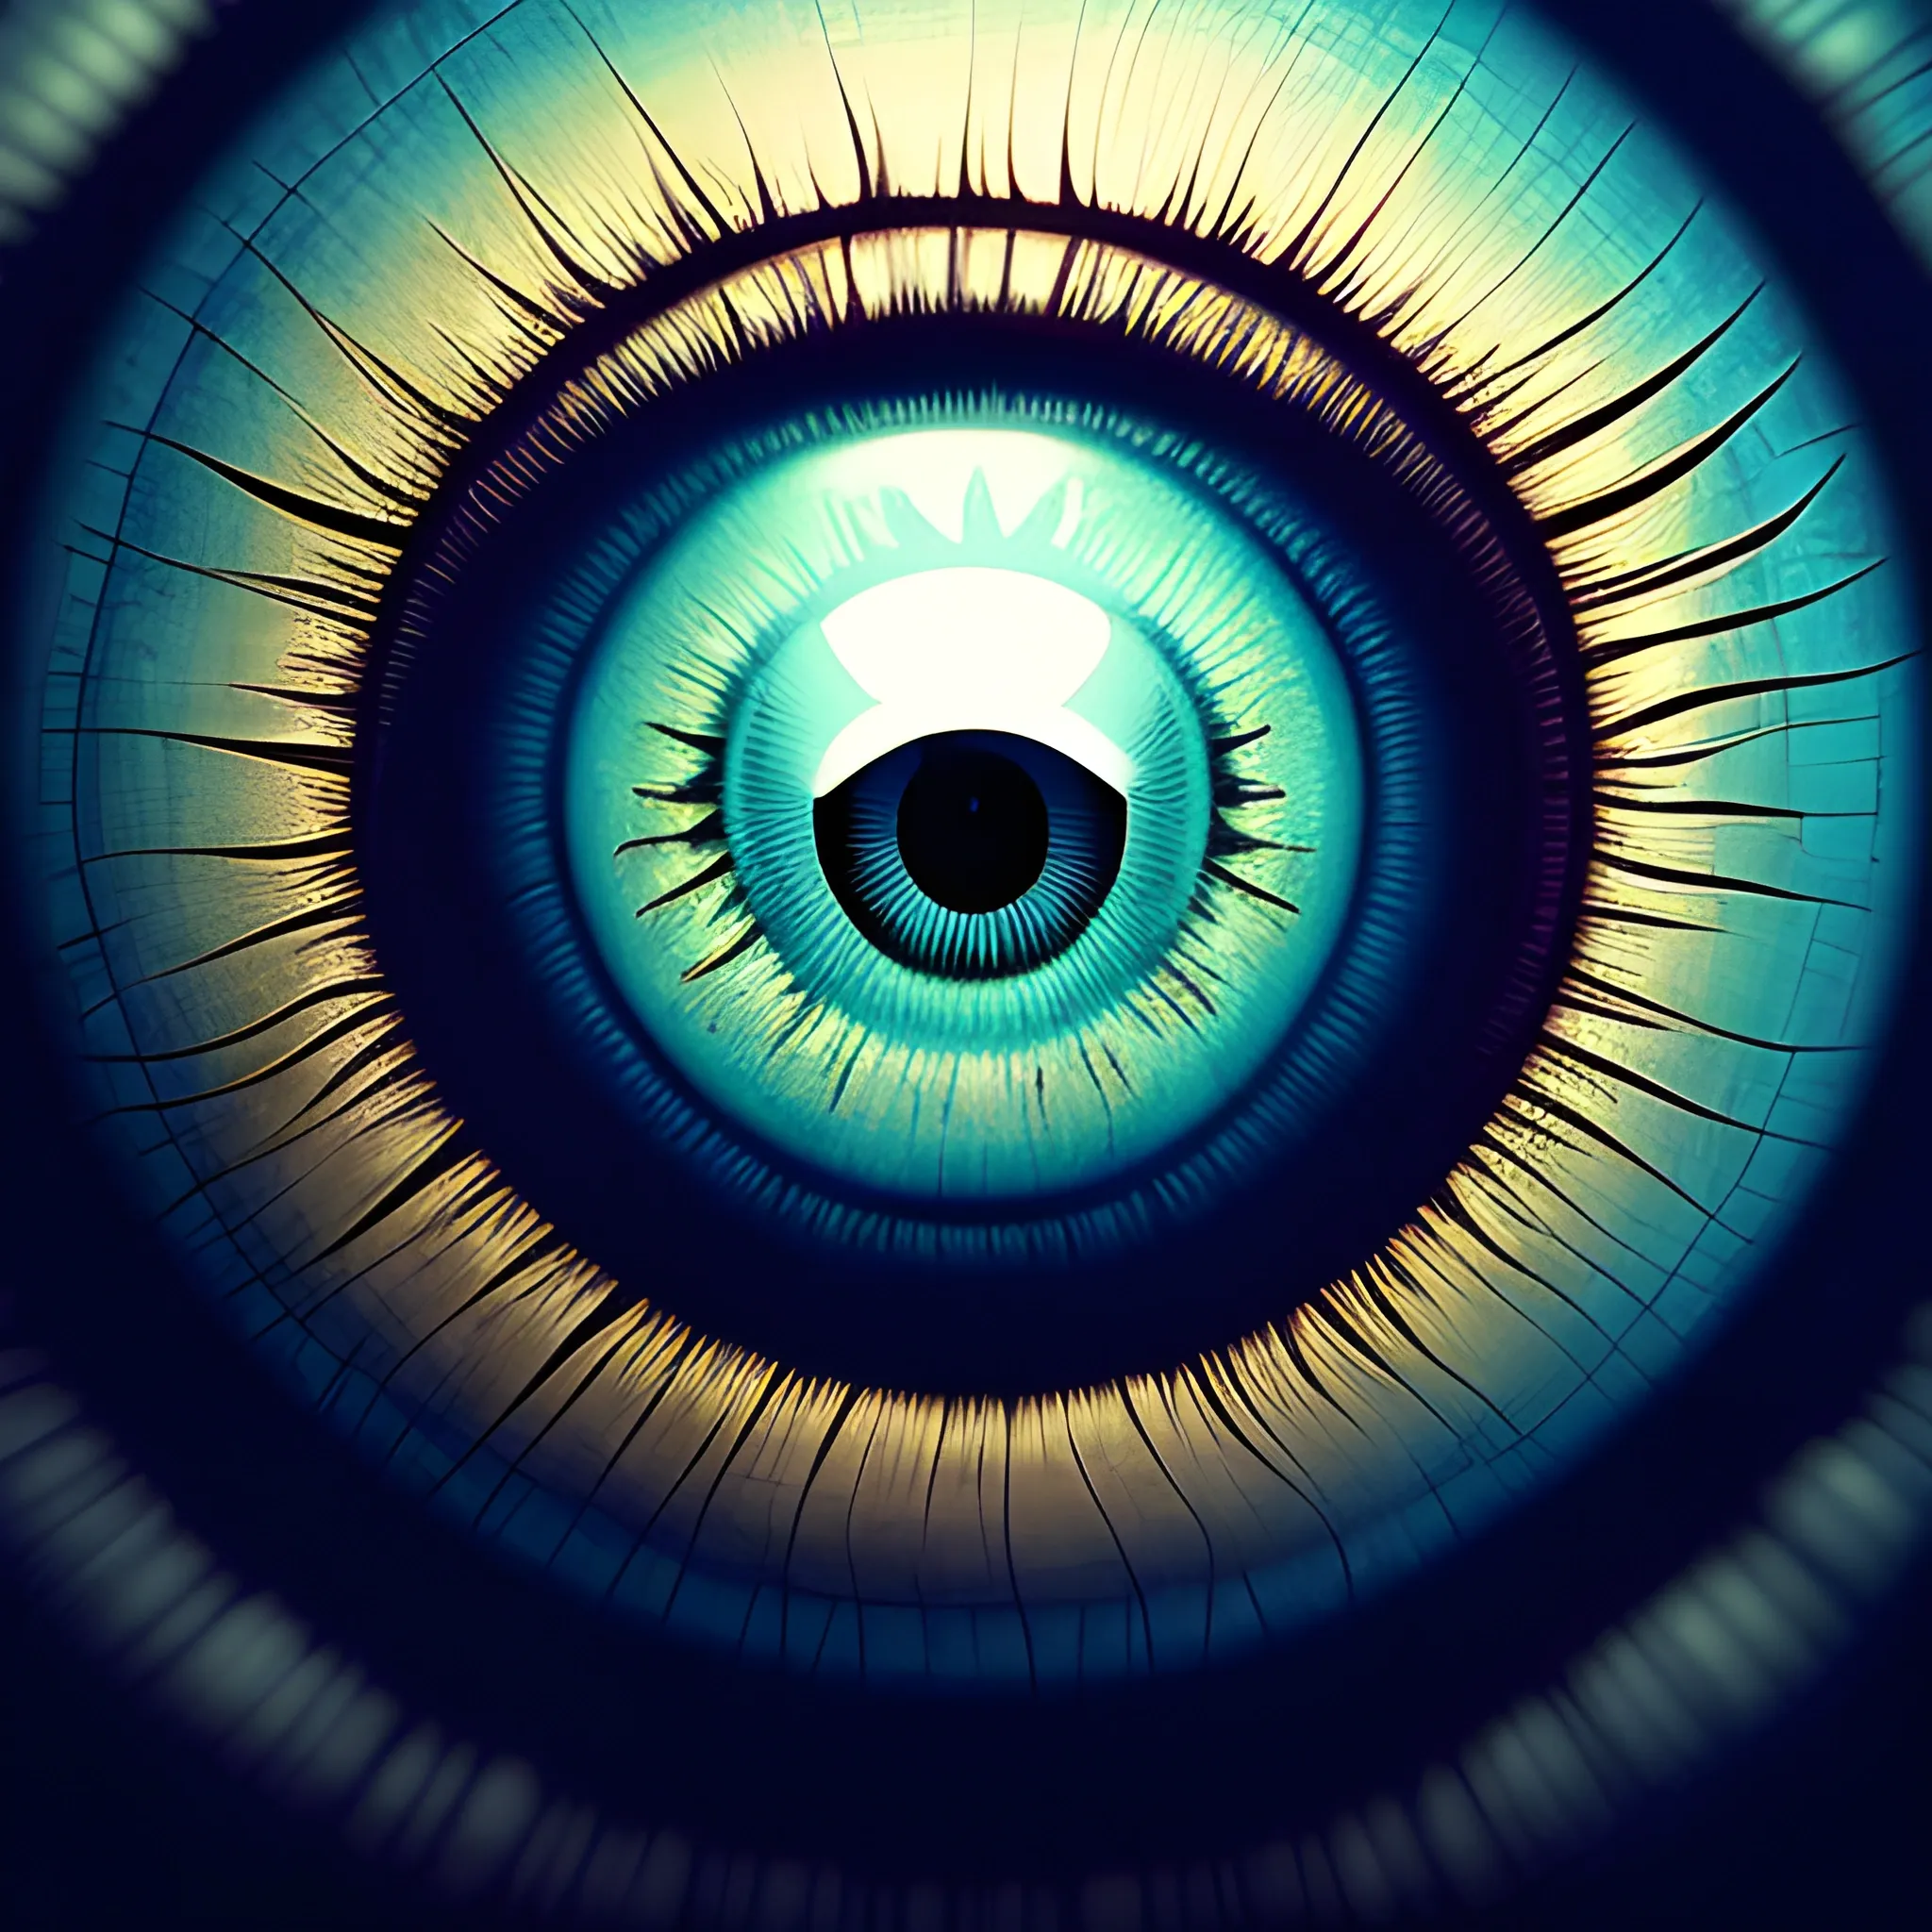 Eyeballs - wallpapers wallpapers art by adam, in the style of surreal and dreamlike compositions, chiaroscuro woodcuts, mind-bending sculptures, national geographic photo, realistic landscape paintings, dark gold and dark cyan, eye-catching composition --ar 9:16